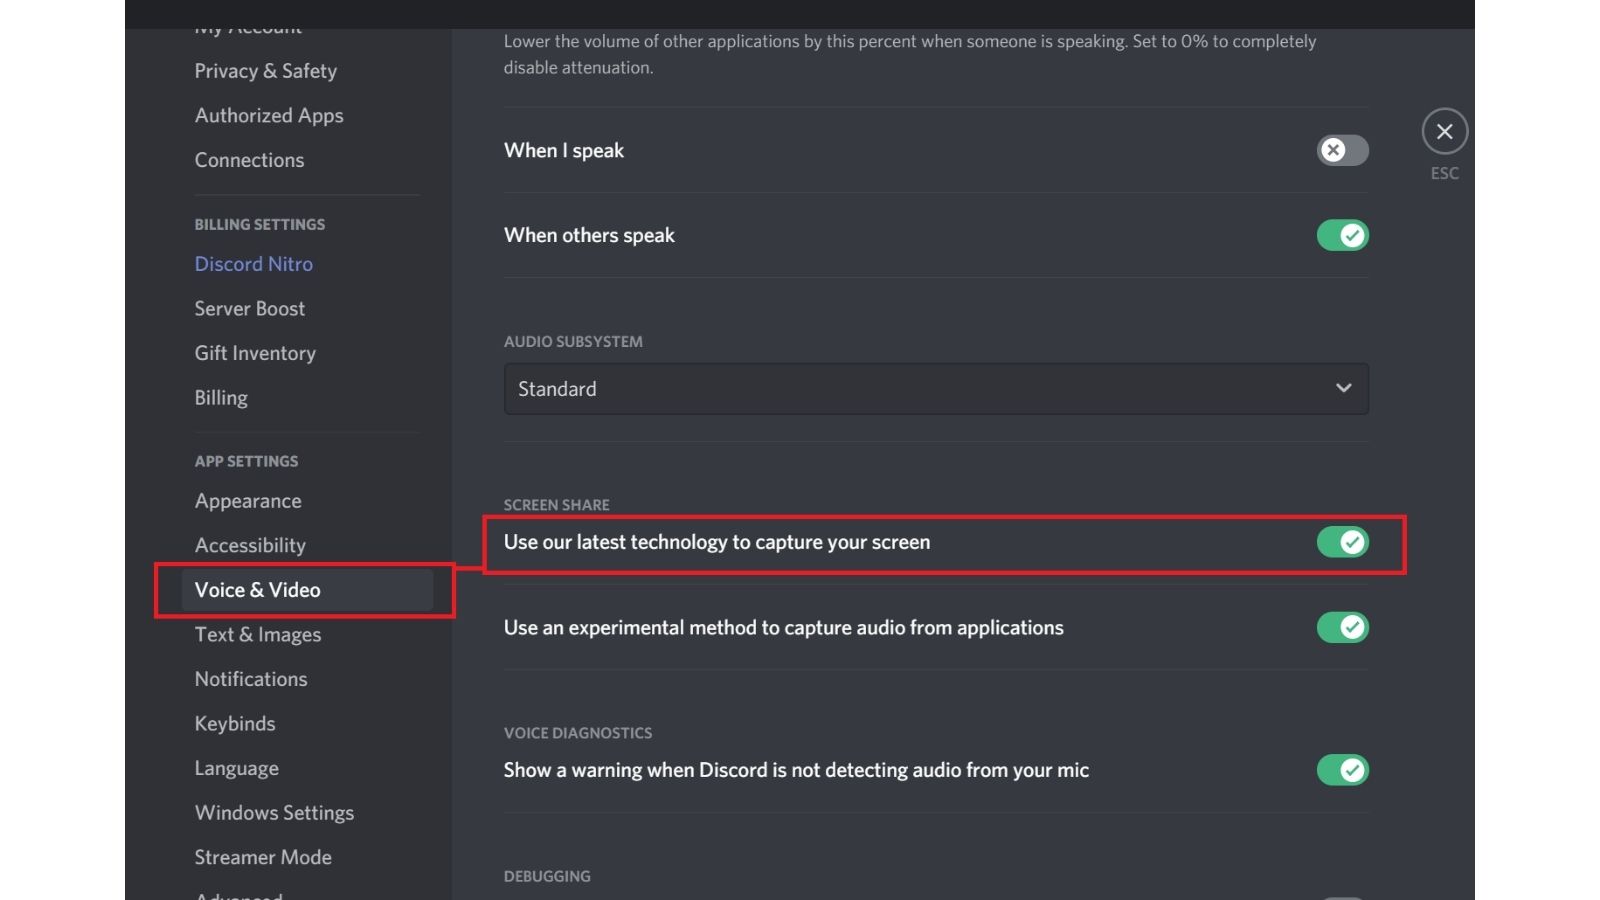 Can I screen share a specific window or application? - Yes, you can choose to screen share a specific window or application instead of your entire screen. Discord allows you to select the desired window or application before starting the screen share.
Why is there a delay in audio during Discord screen share? - A delay in audio during Discord screen share can be caused by various factors, including network issues, system performance, or incompatible hardware. Optimizing your network and device s